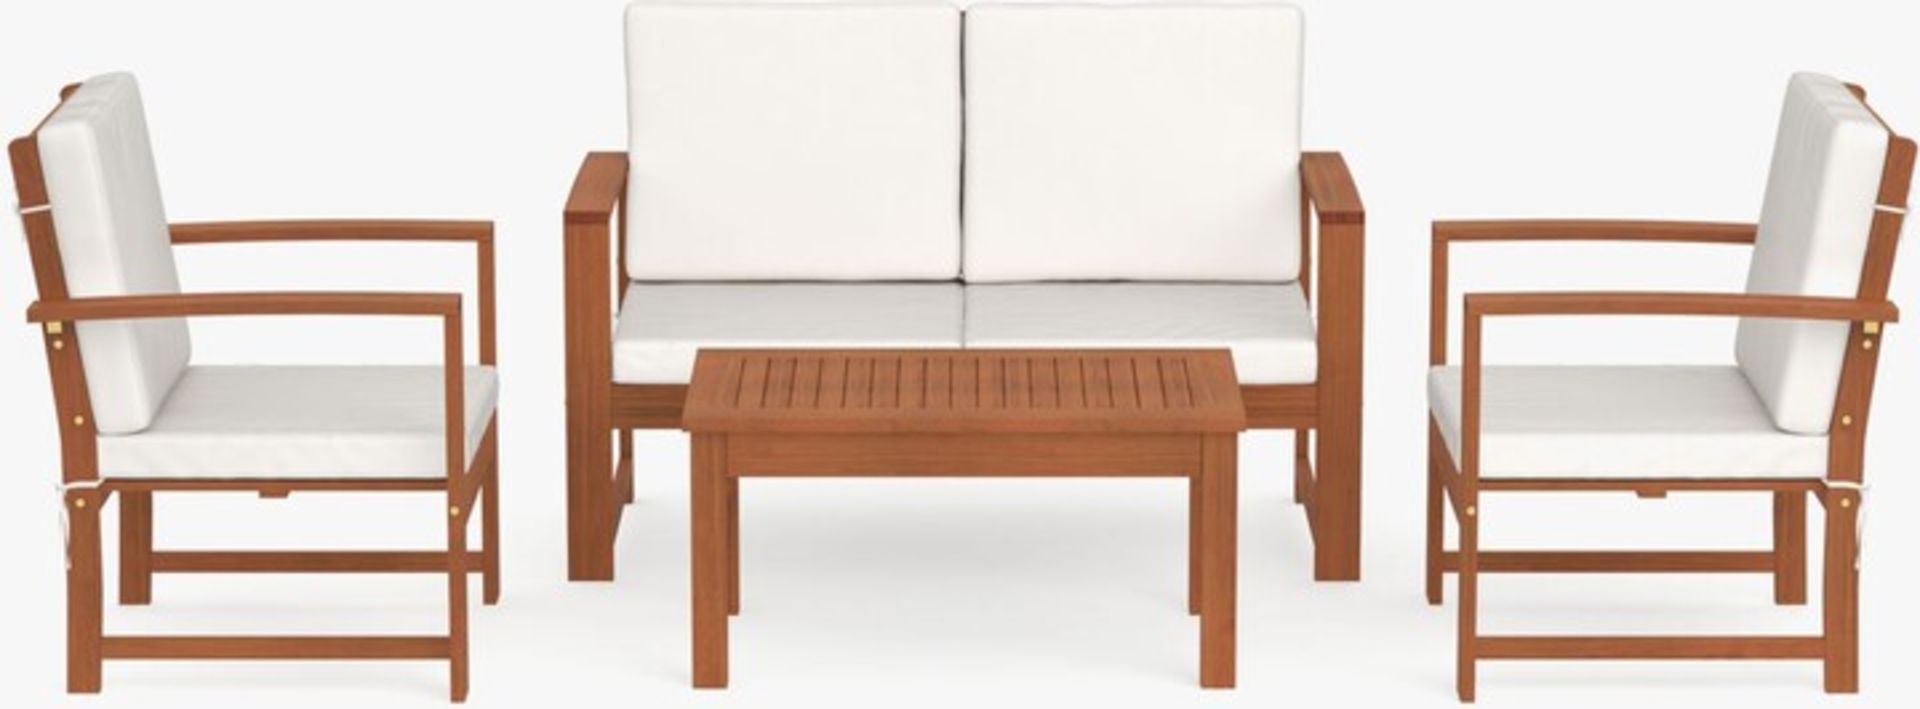 5 X BRAND NEW JOHN LEWIS 4-Seater Garden Lounging Table & Chairs Set. RRP £898.50. Upgrade your